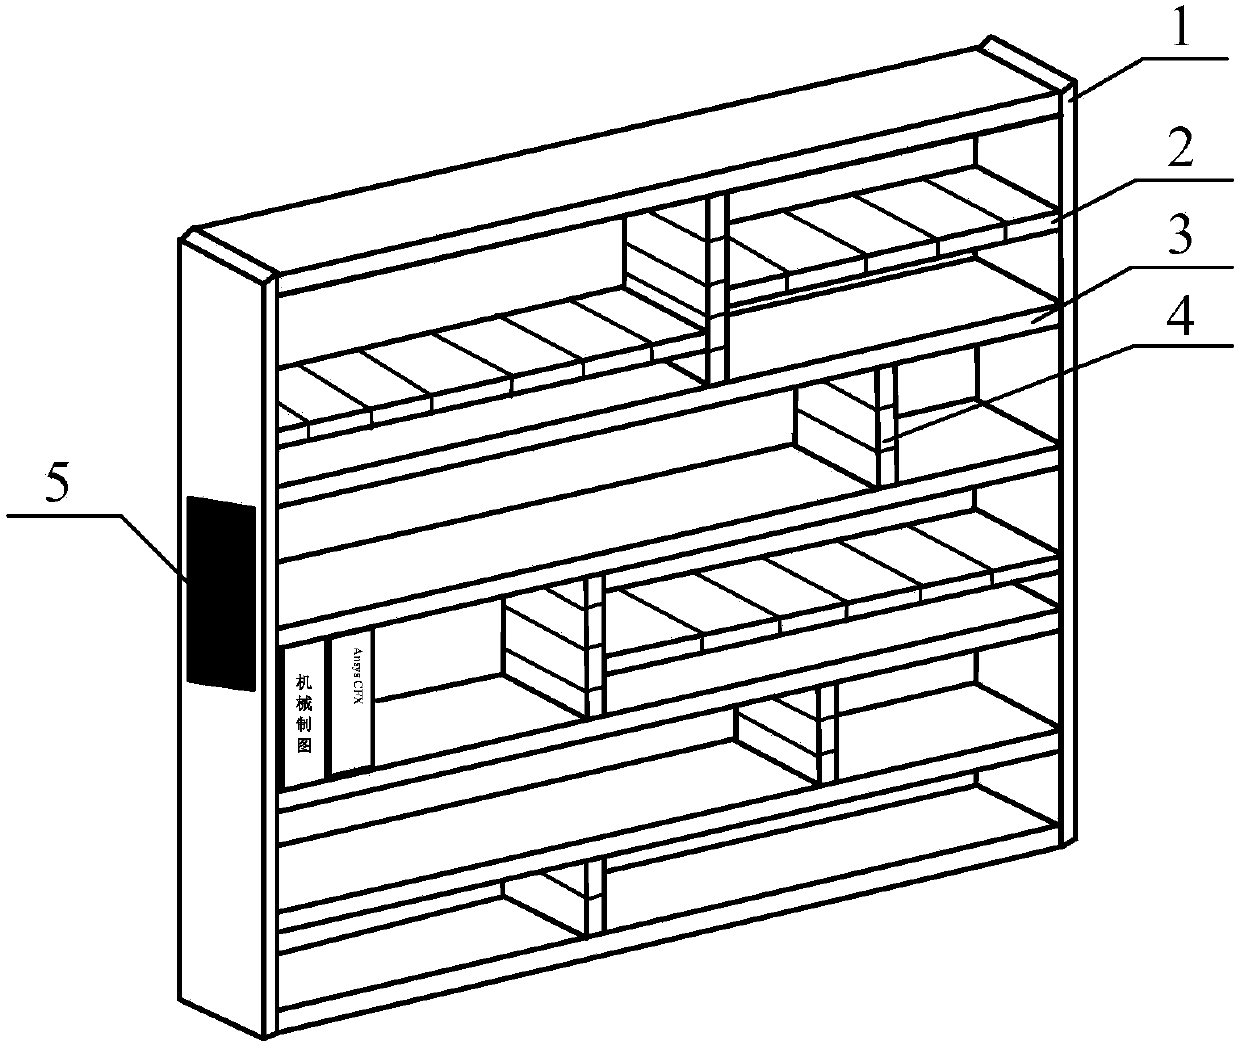 Intelligent bookcase of which space can be recombined and operating method